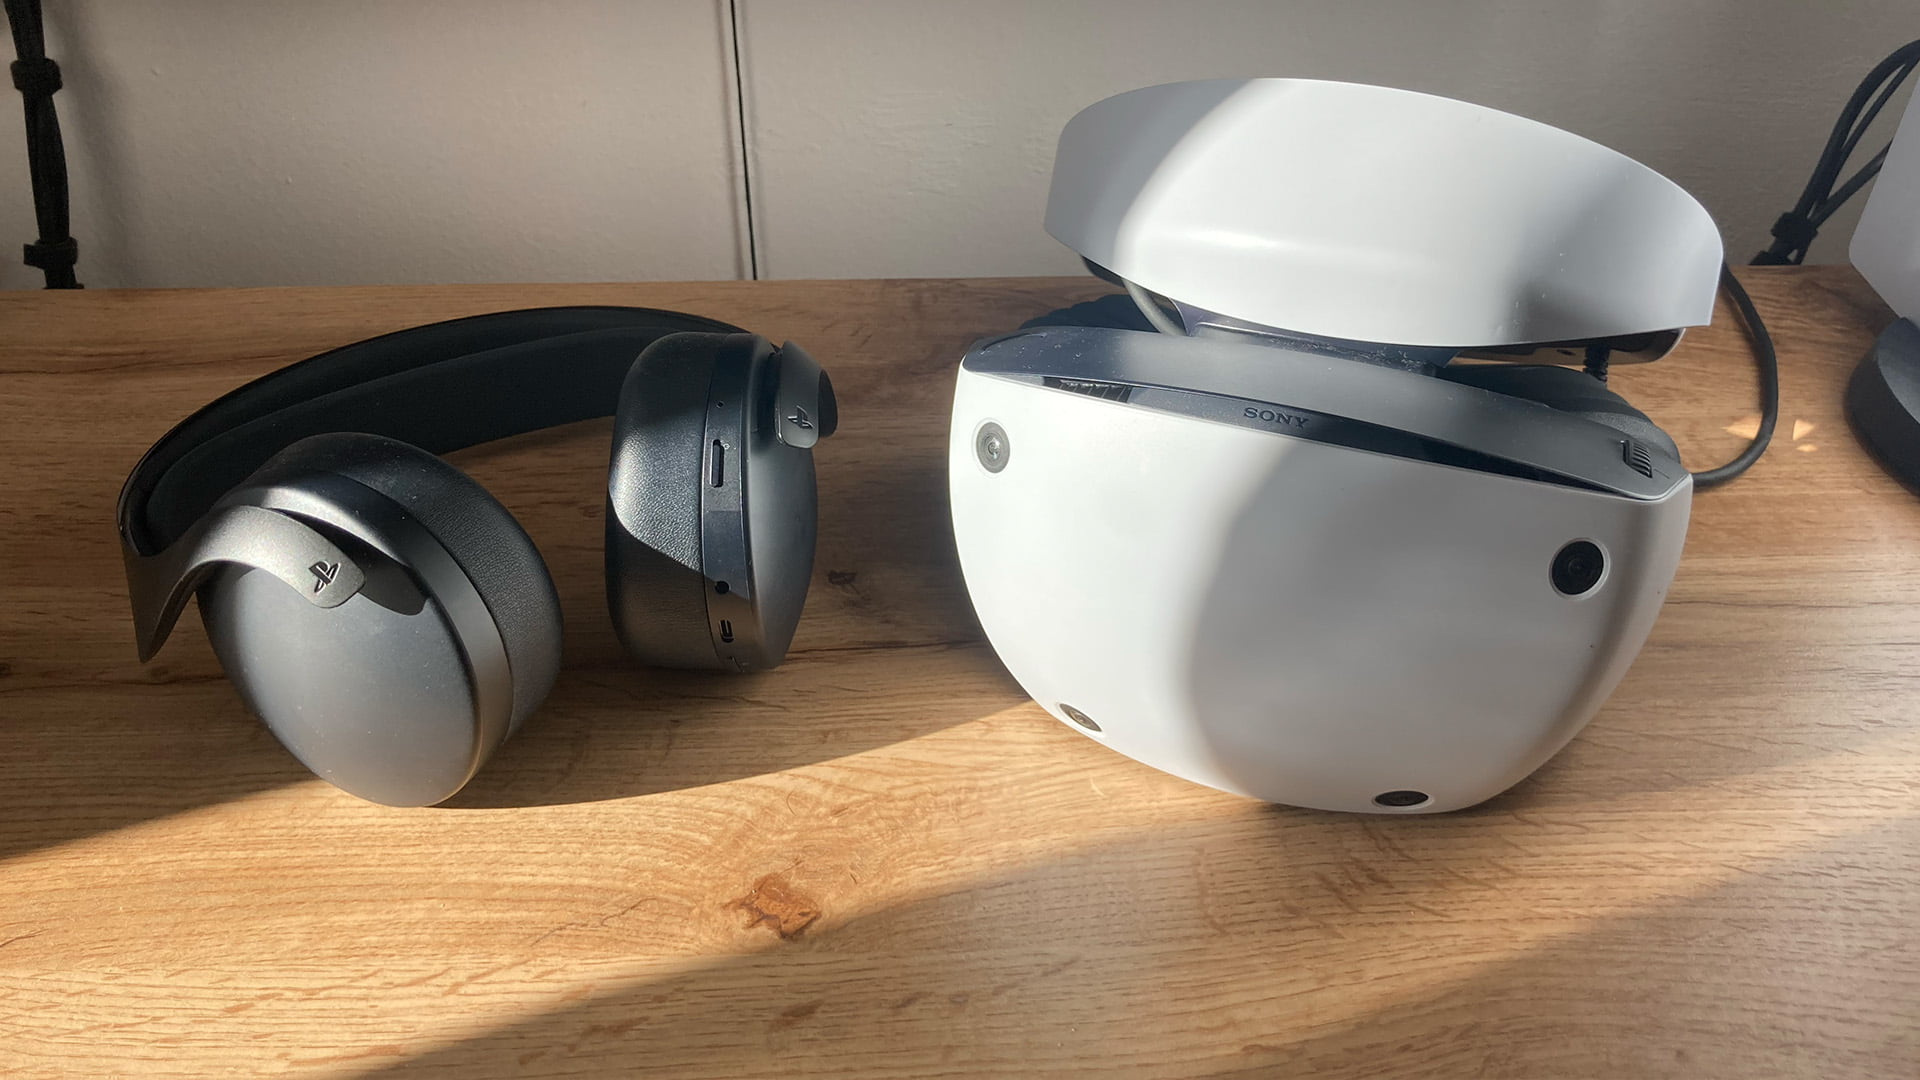 Sony’s Pulse 3D headset dramatically improves immersion with PSVR 2